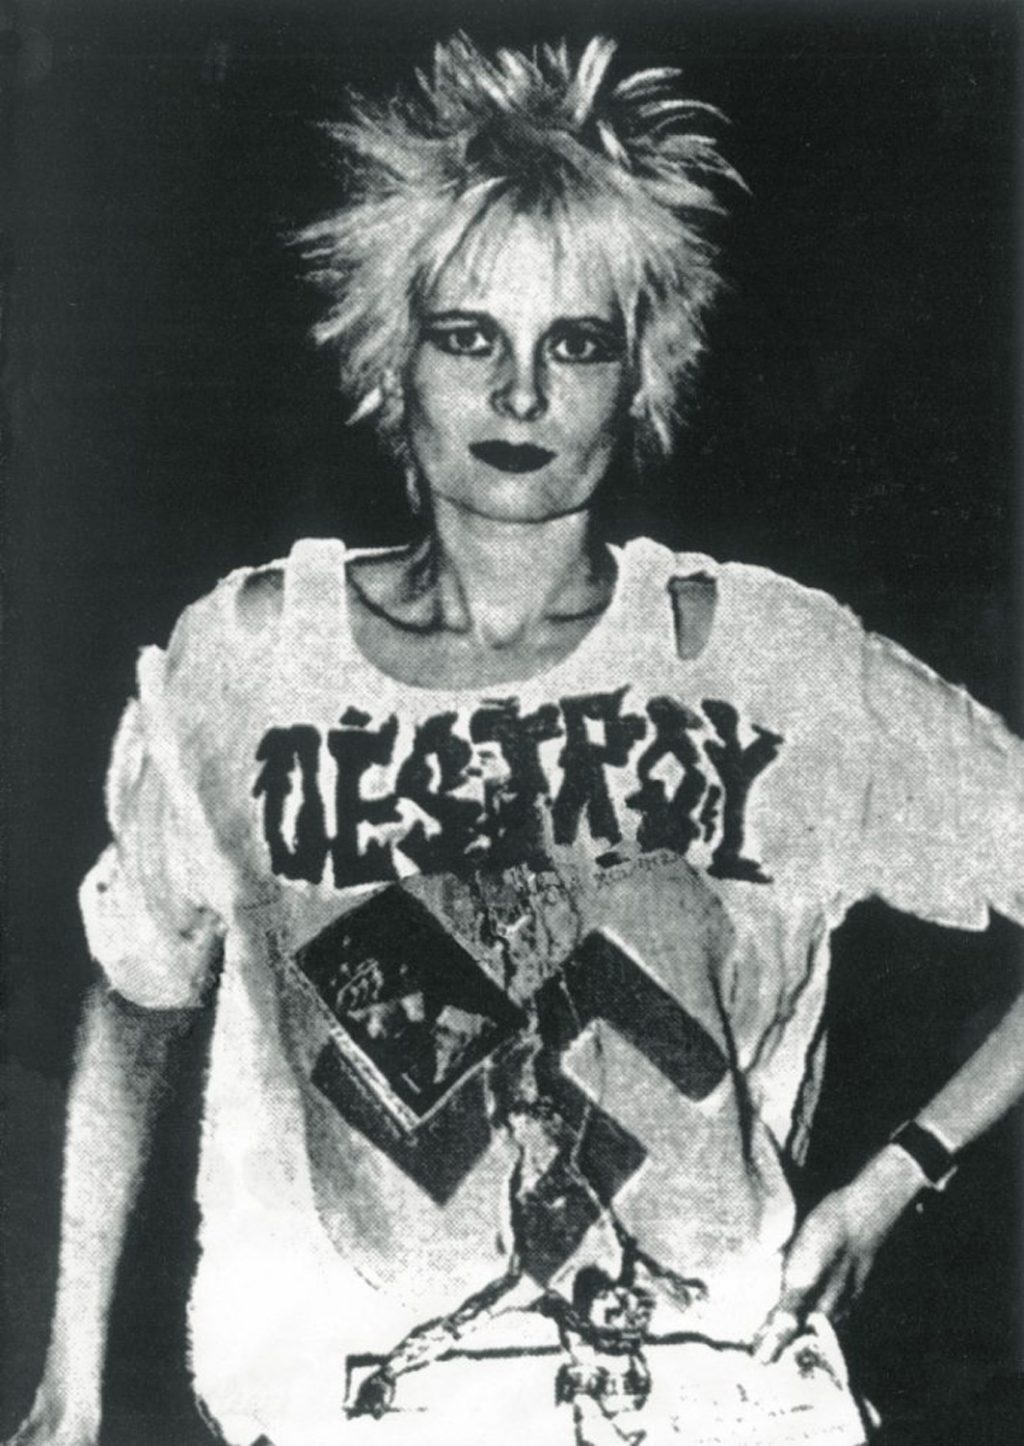 Vivienne Westwood in punk style during 1970 in black and white 